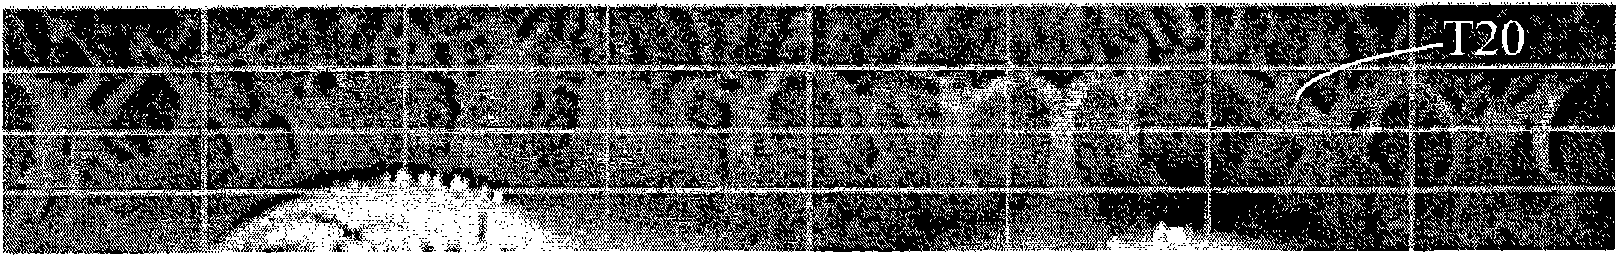 Method for selecting and rapidly comparing robust features of iris images